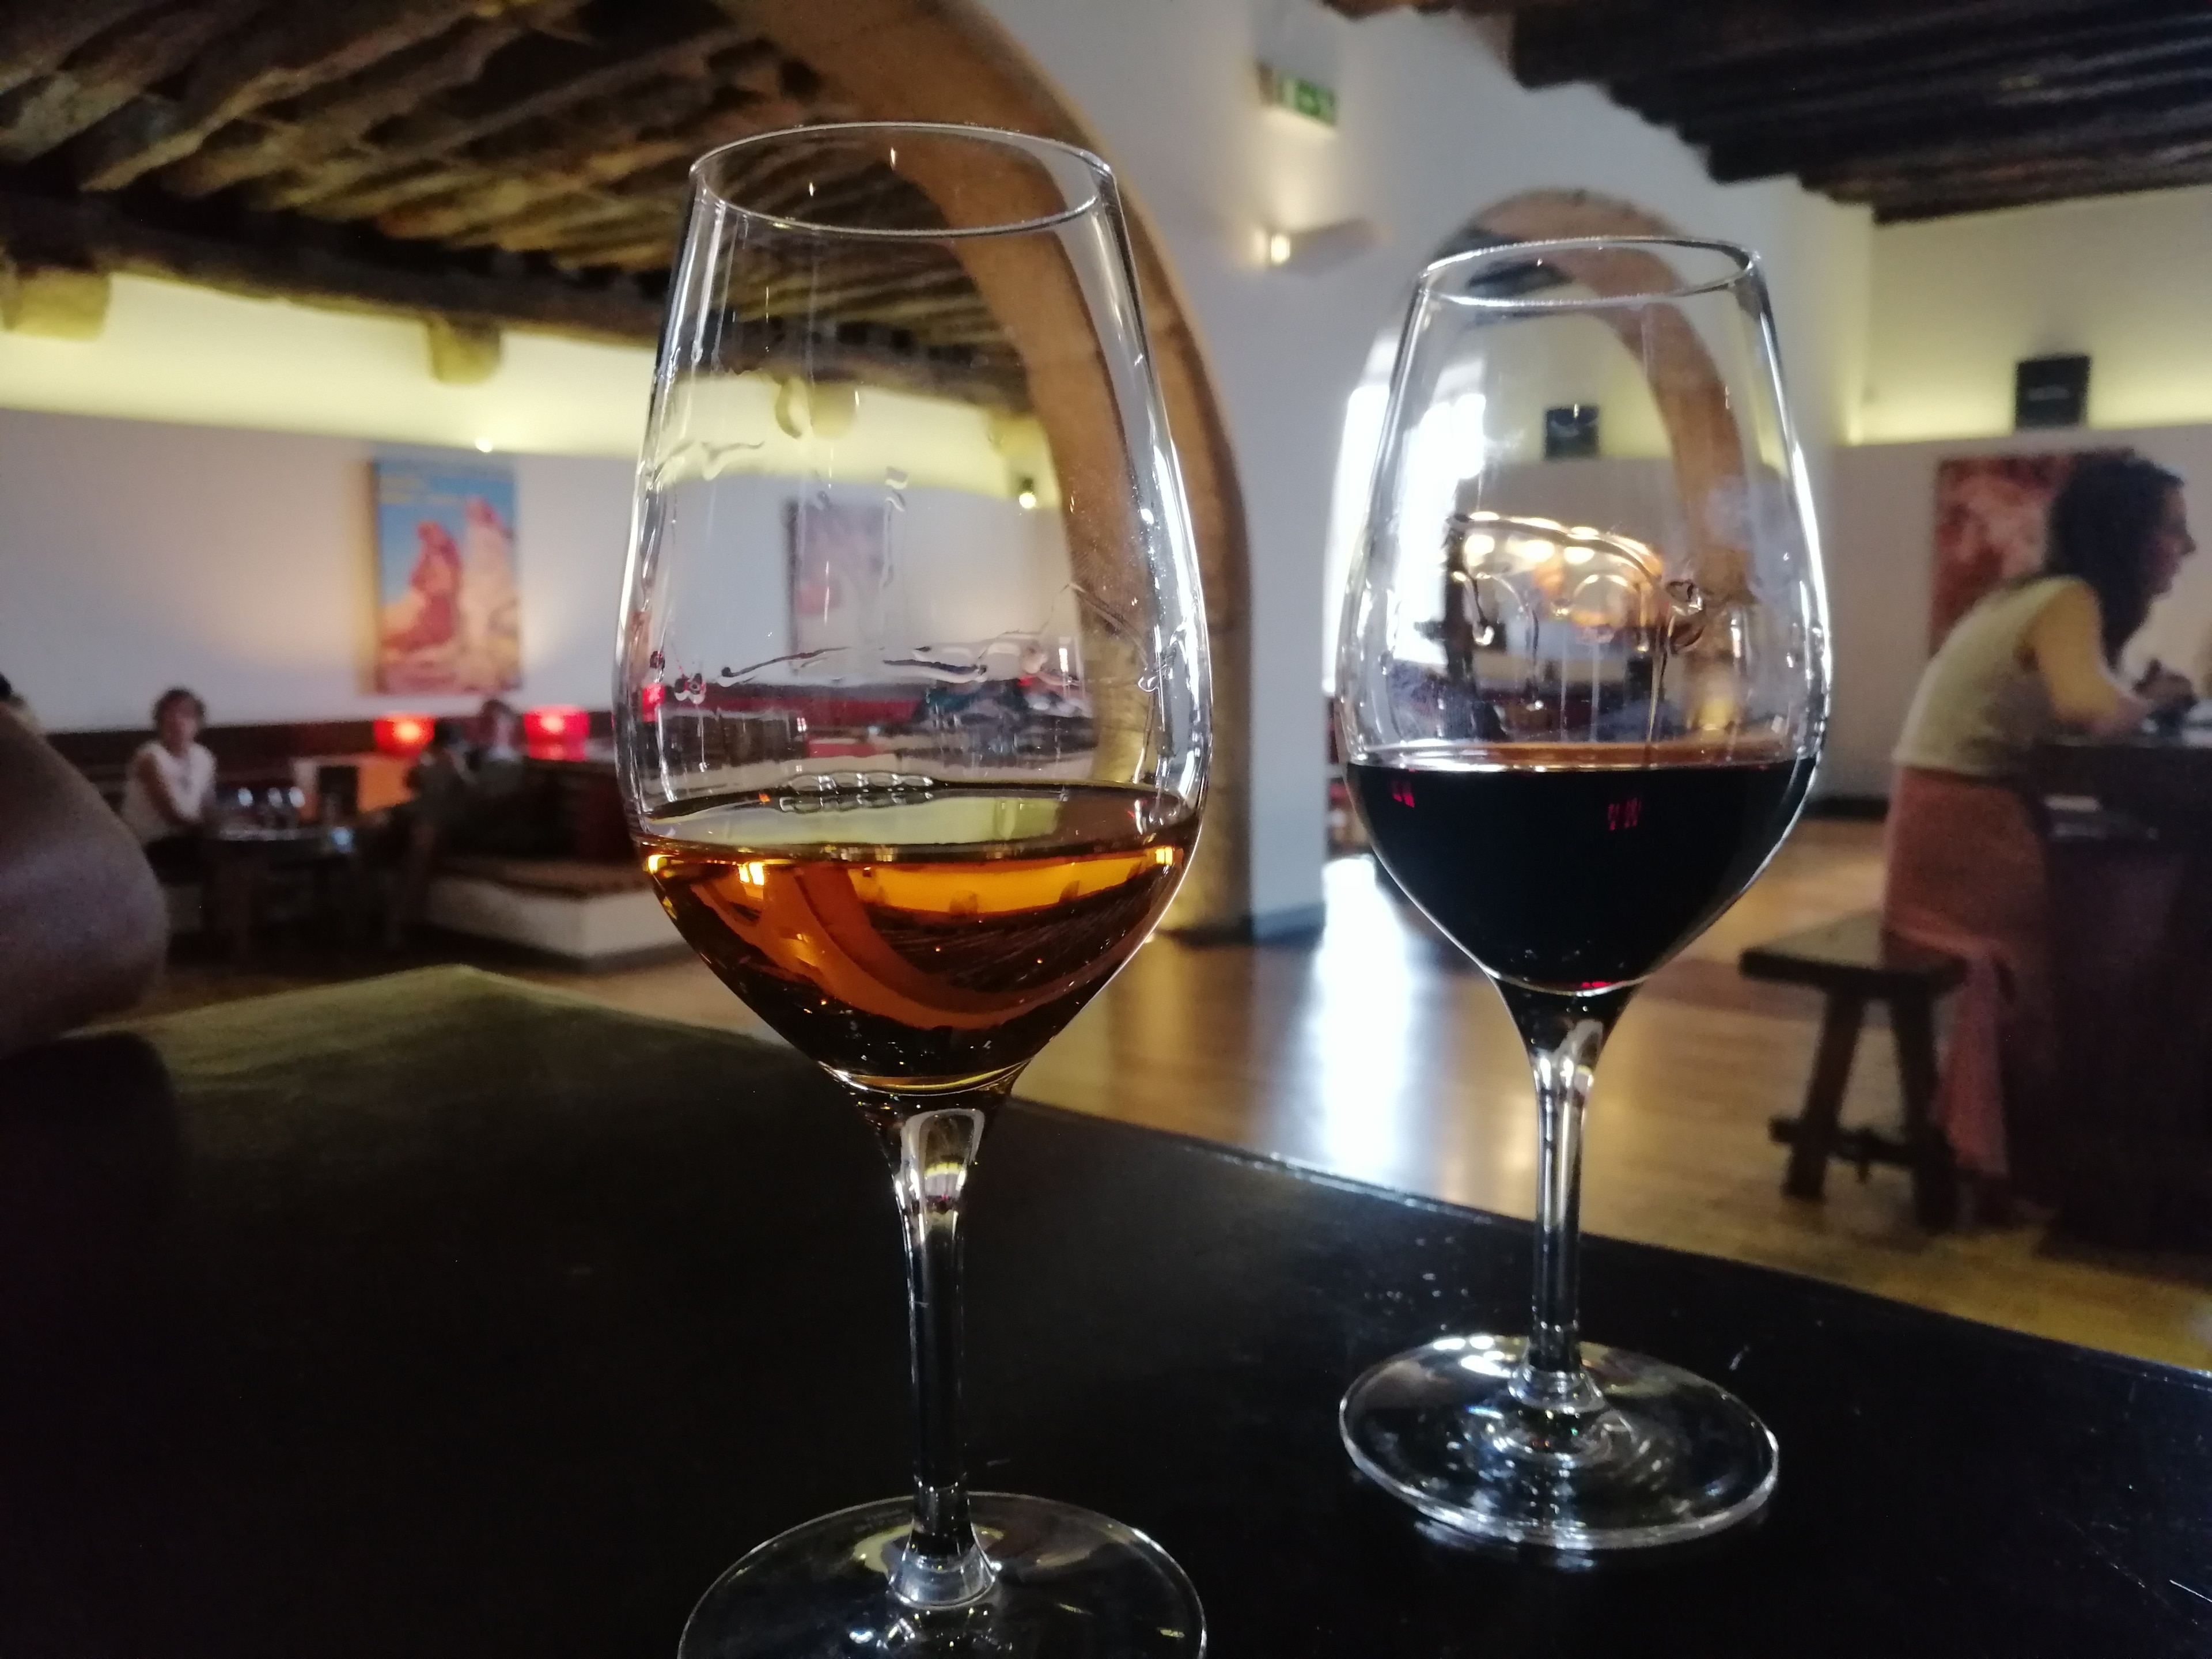 Wine tasting in Porto. Highly recommend the a wine tour here.